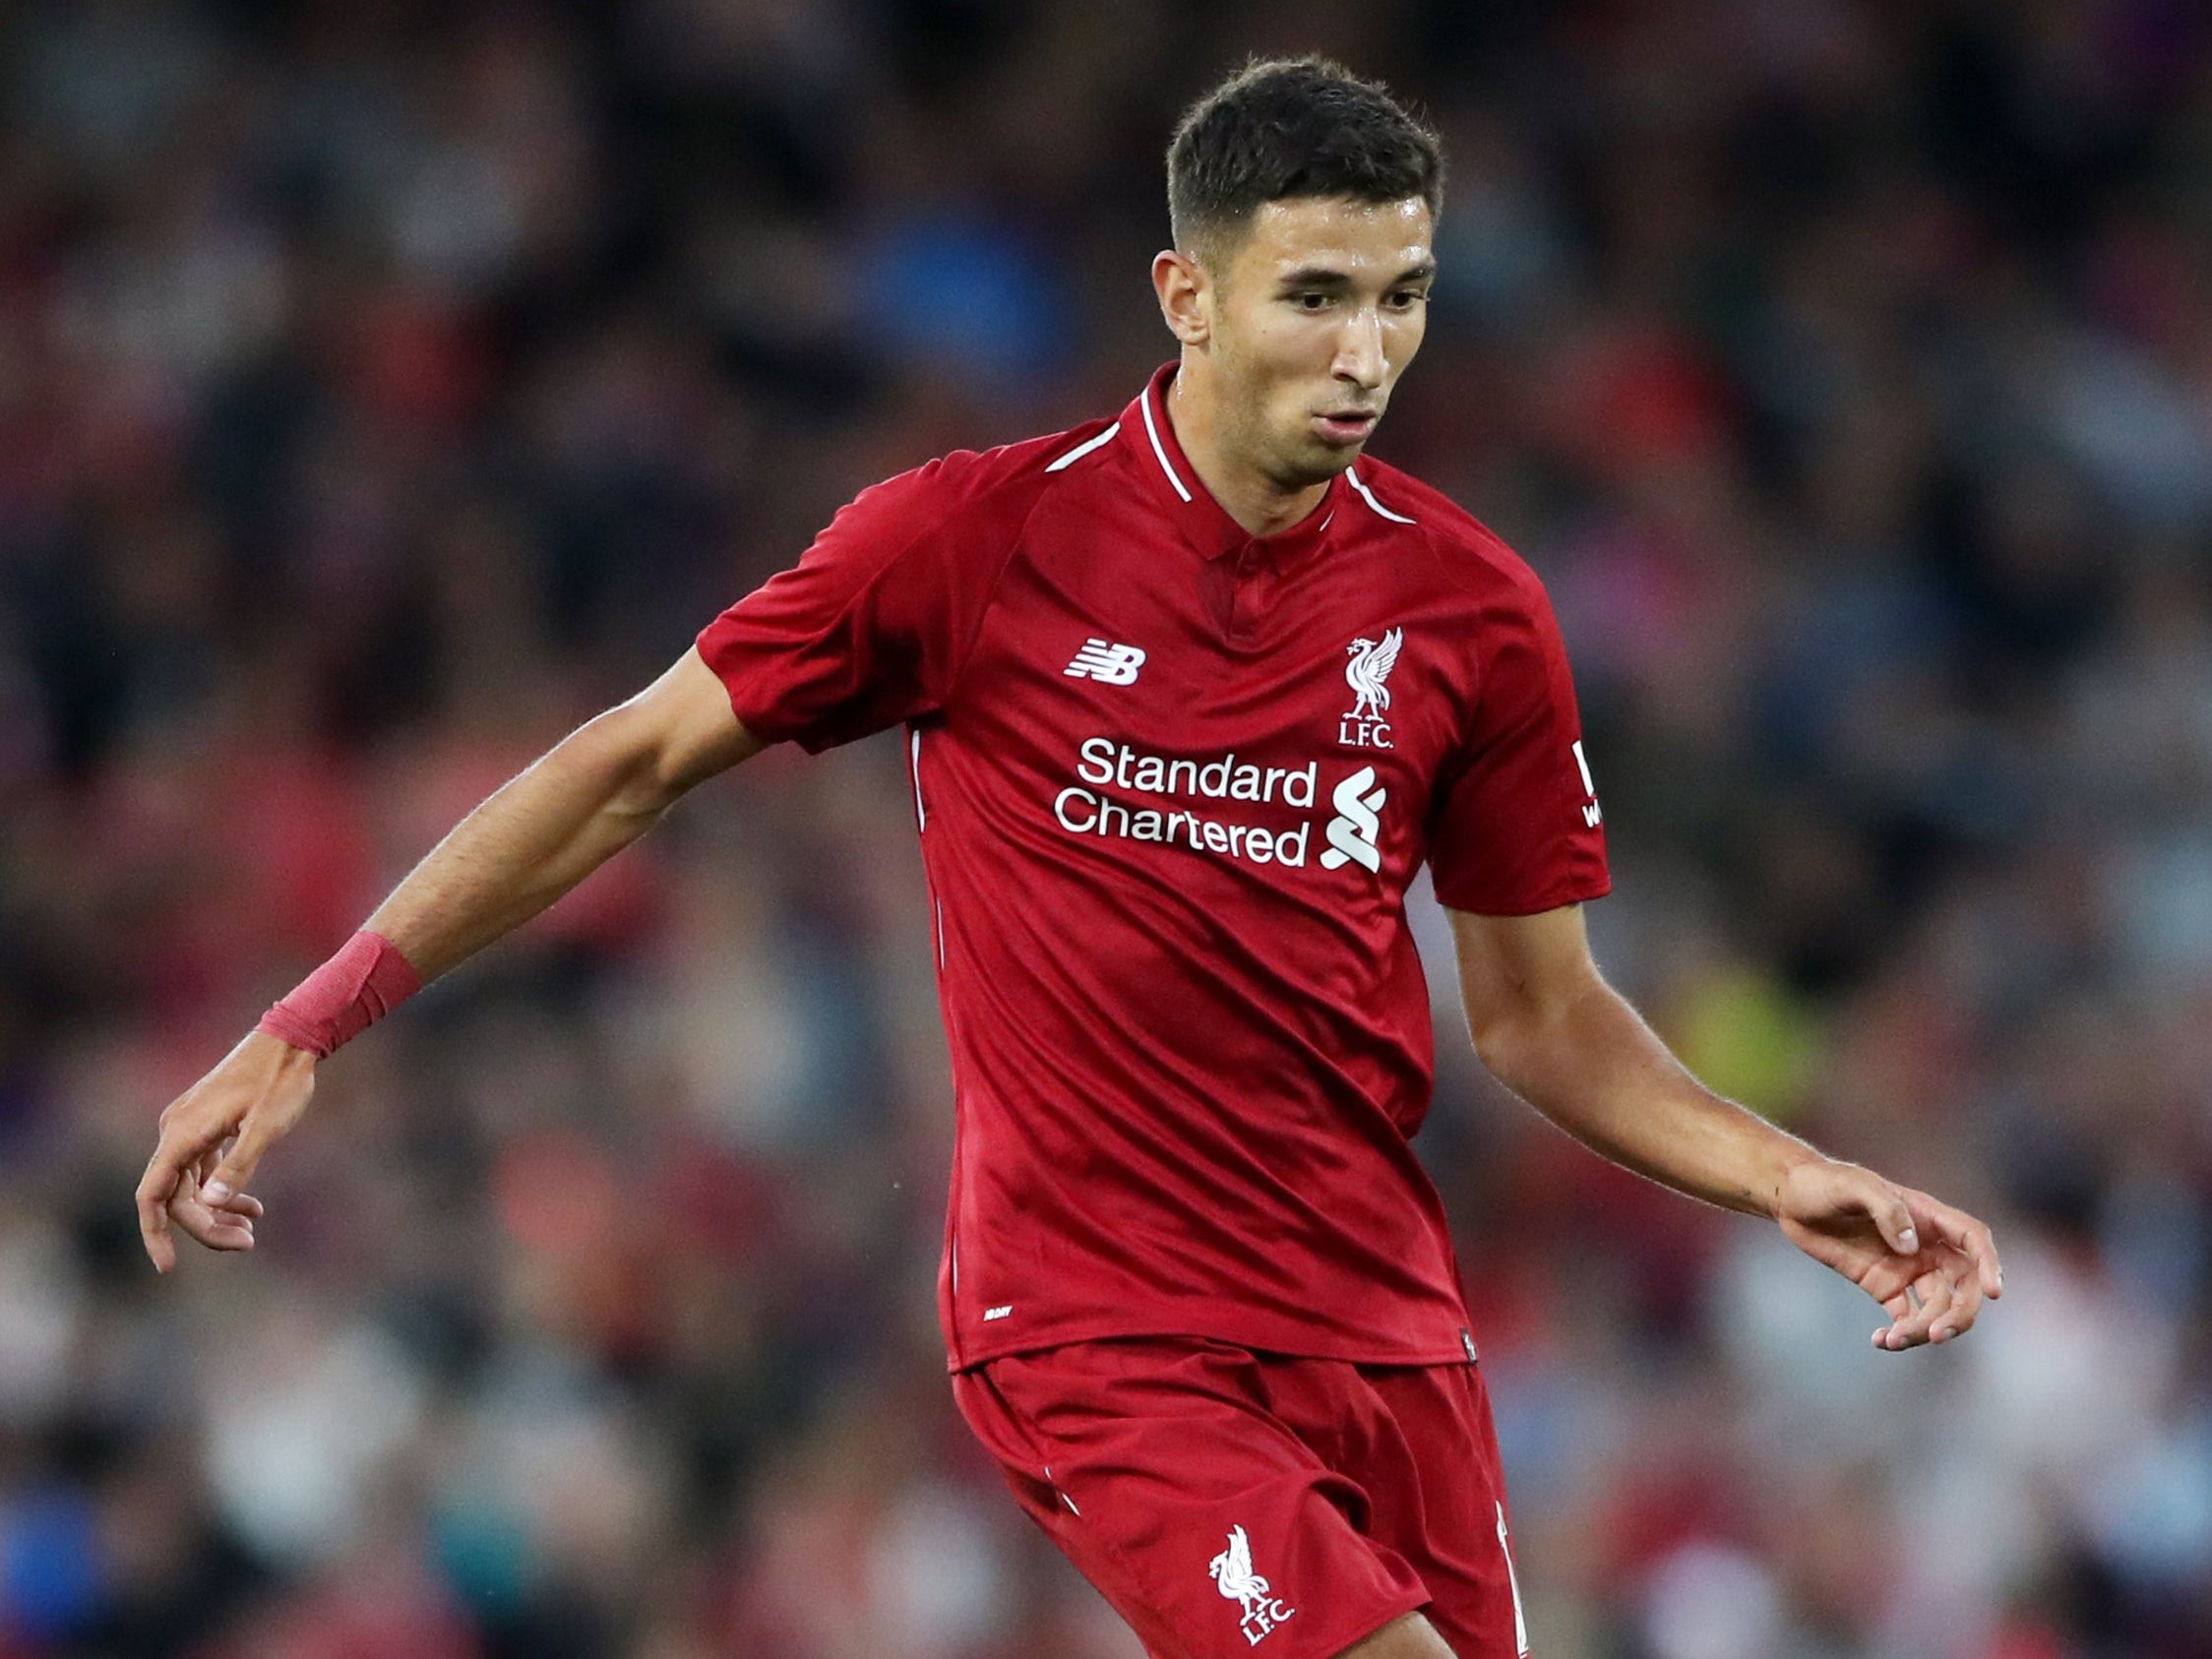 Marko Grujic has completed a permanent move to Porto